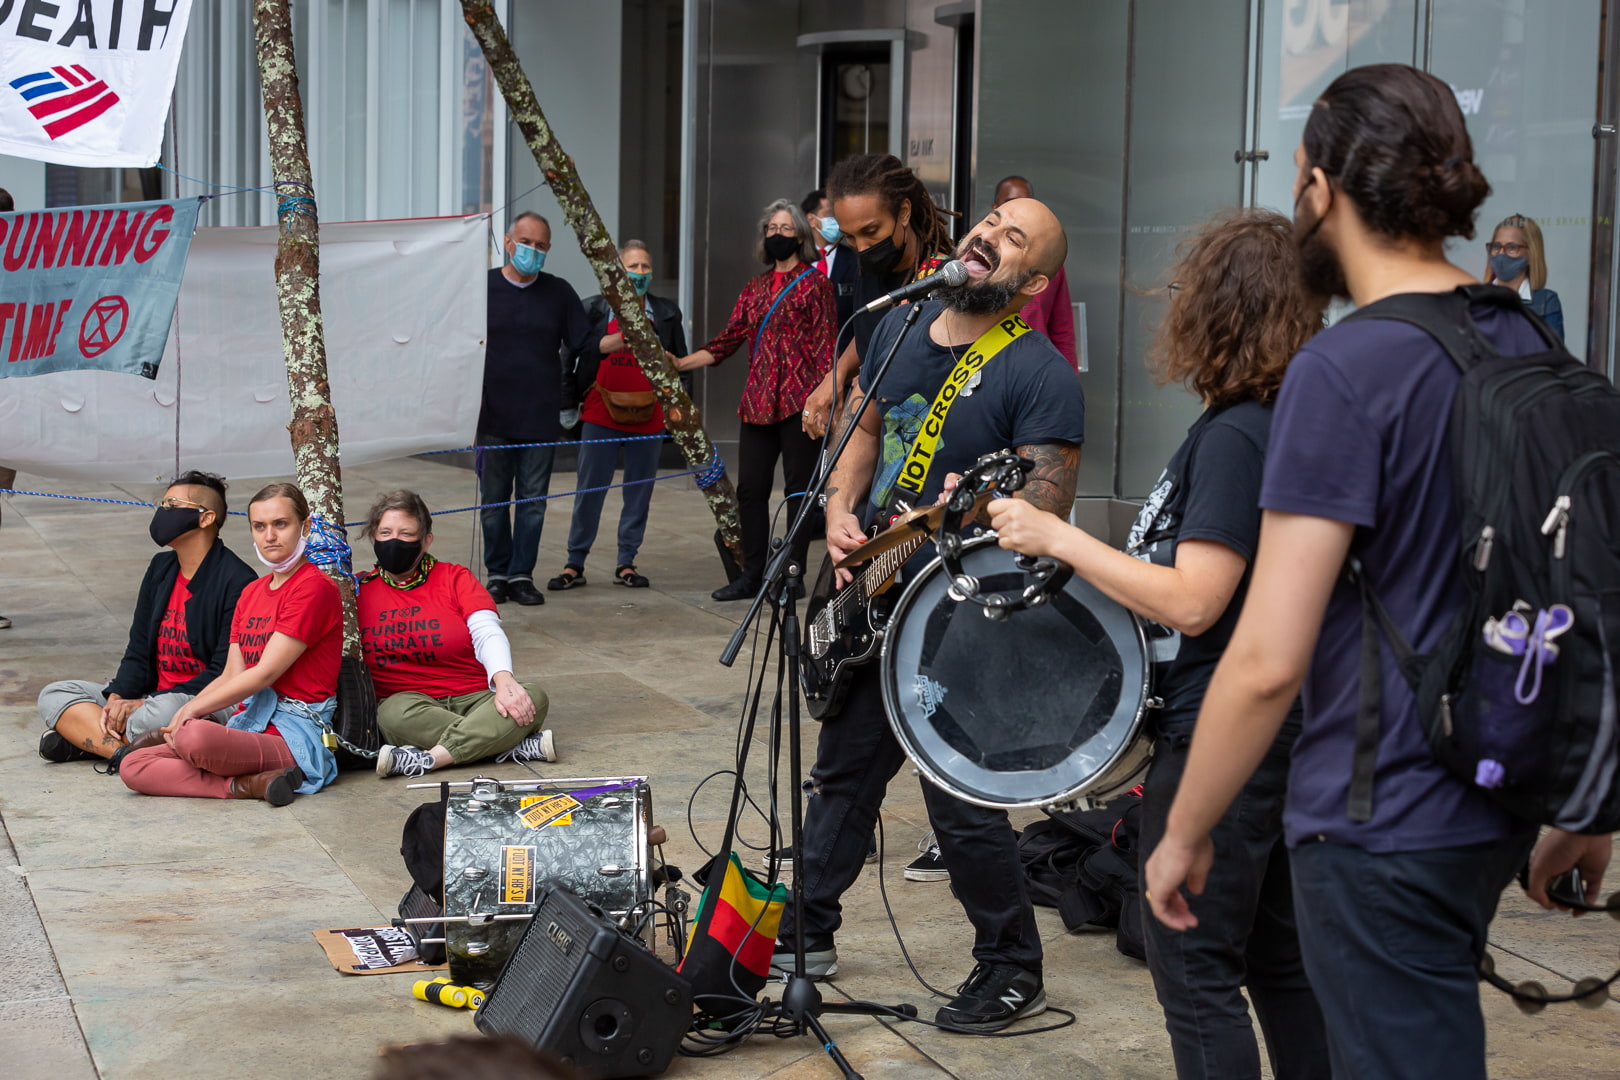 A rock band perform next to a tripod set-up in the forecourt of a skyscraper.